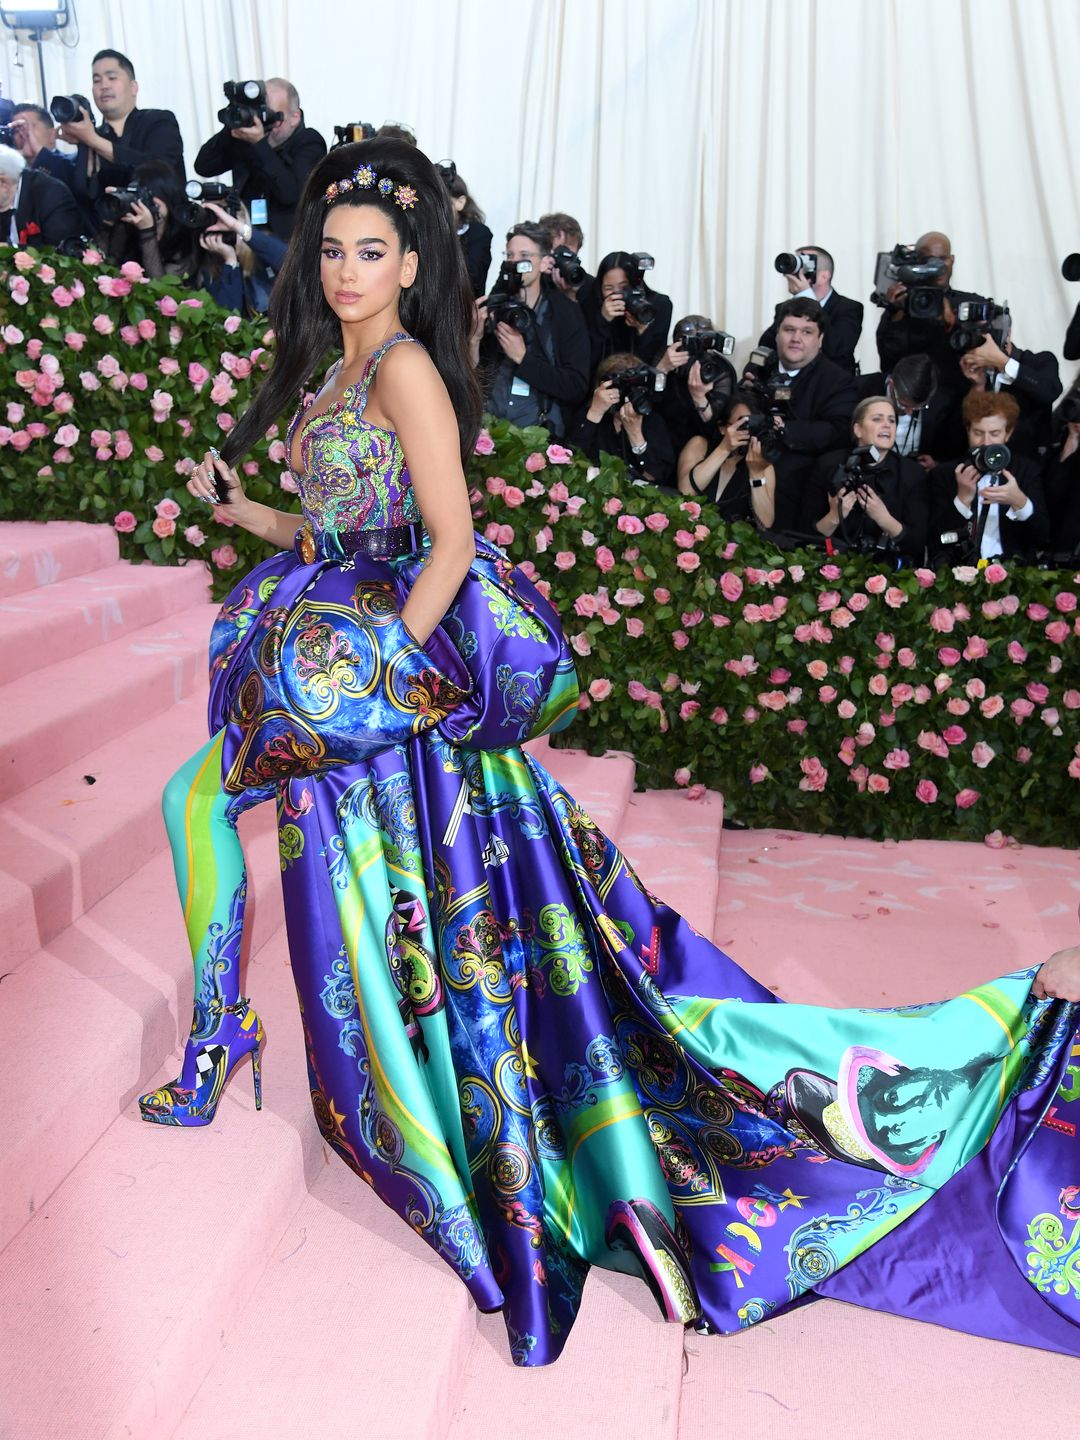 Dua Lipa walking up the pink carpet steps of the met gala in a neon blue and navy Versace patterned gown